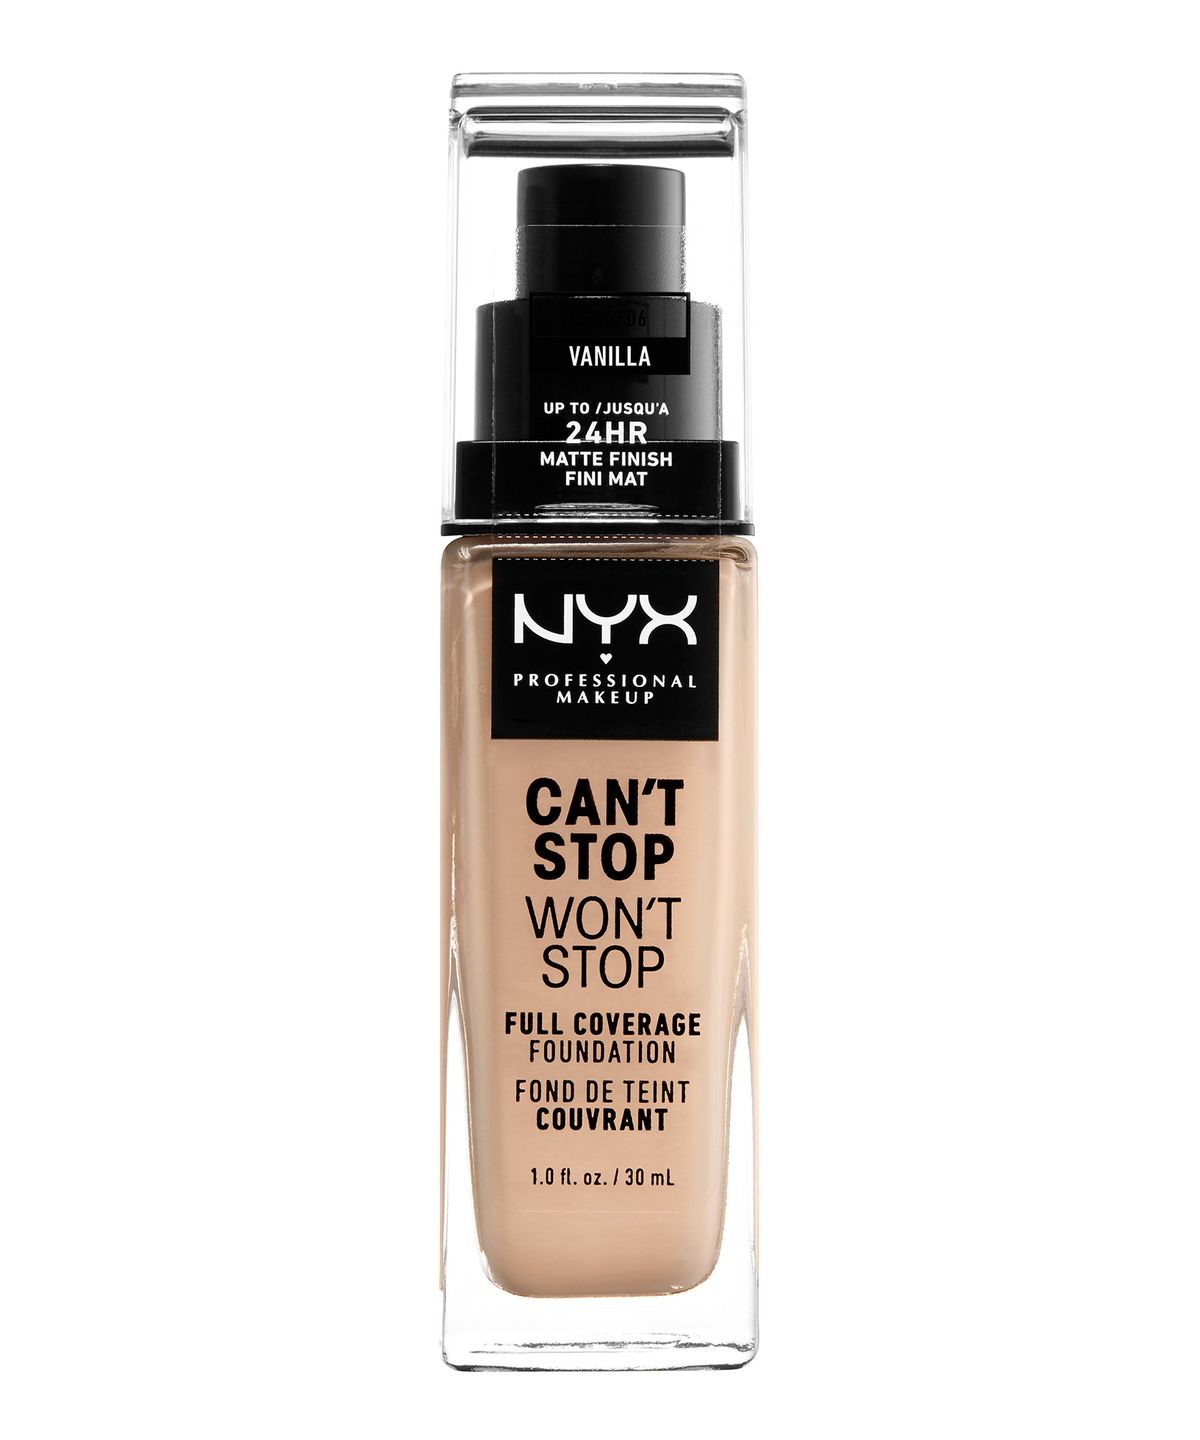 CANT STOP WONT STOP 24HR FOUNDATION VANILLA - NYX PROFESSIONAL MAKEUP